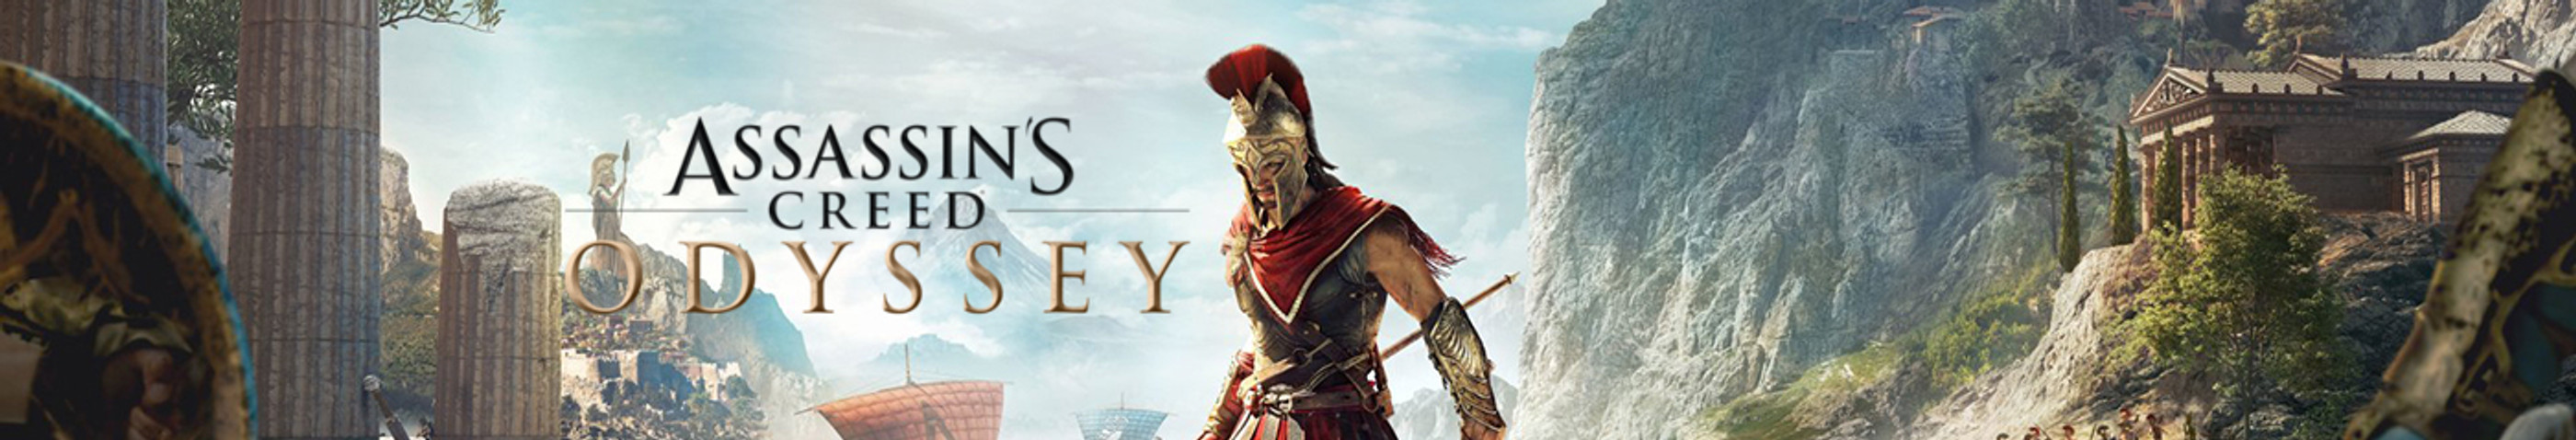 ACO-assassin-creed-odyssey-guide-tuto-map-loot-armure-legendaire-culte-solution